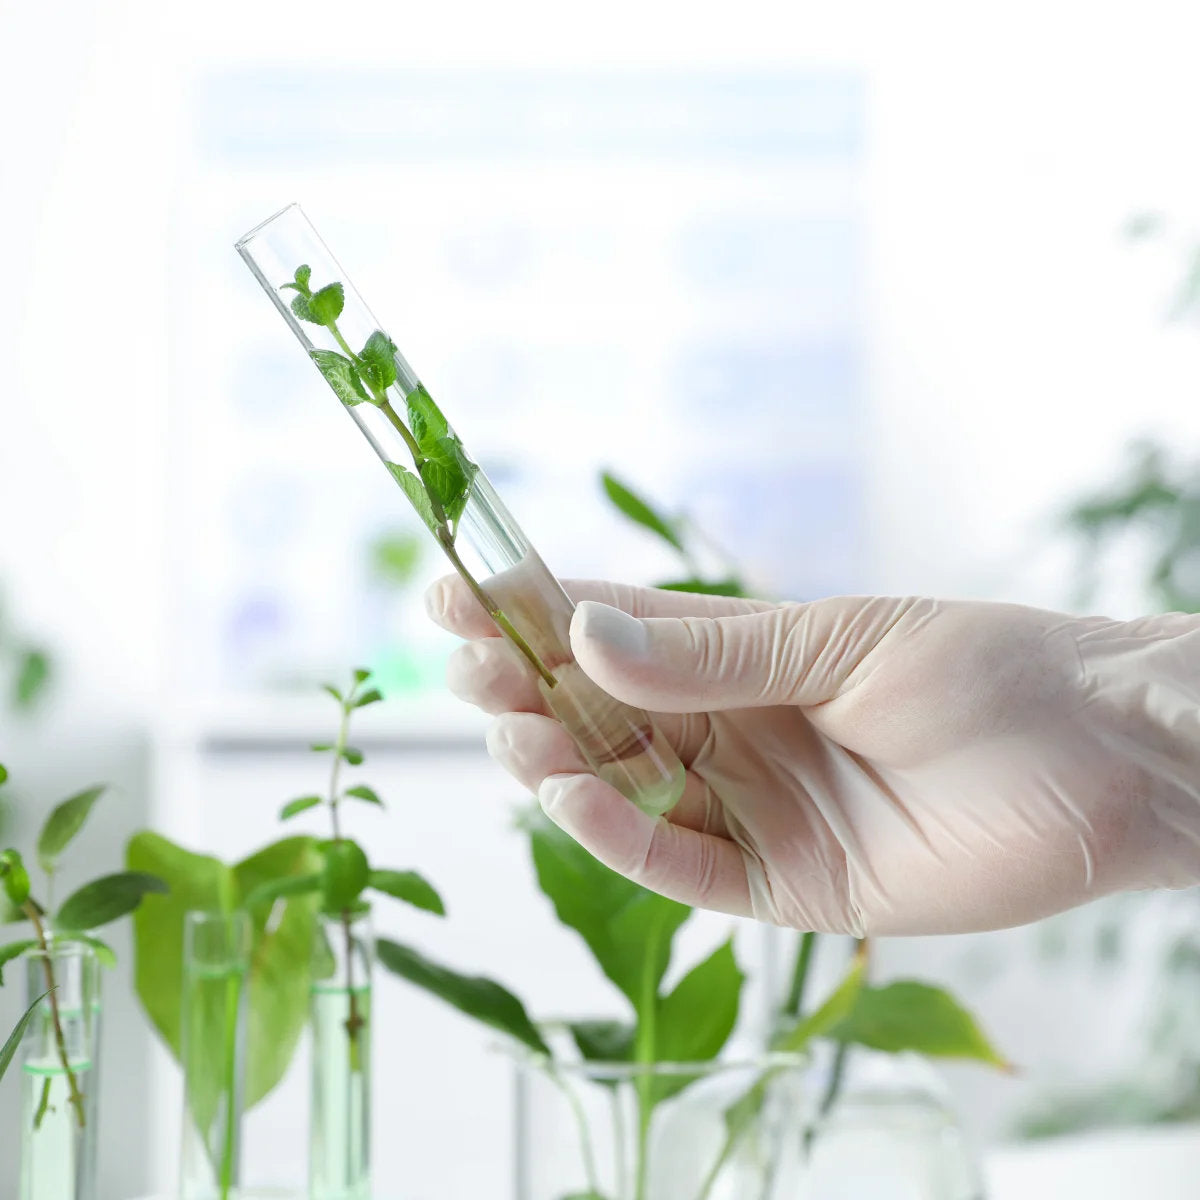 image of Nutrigenesis® lab grown plant in a test tube